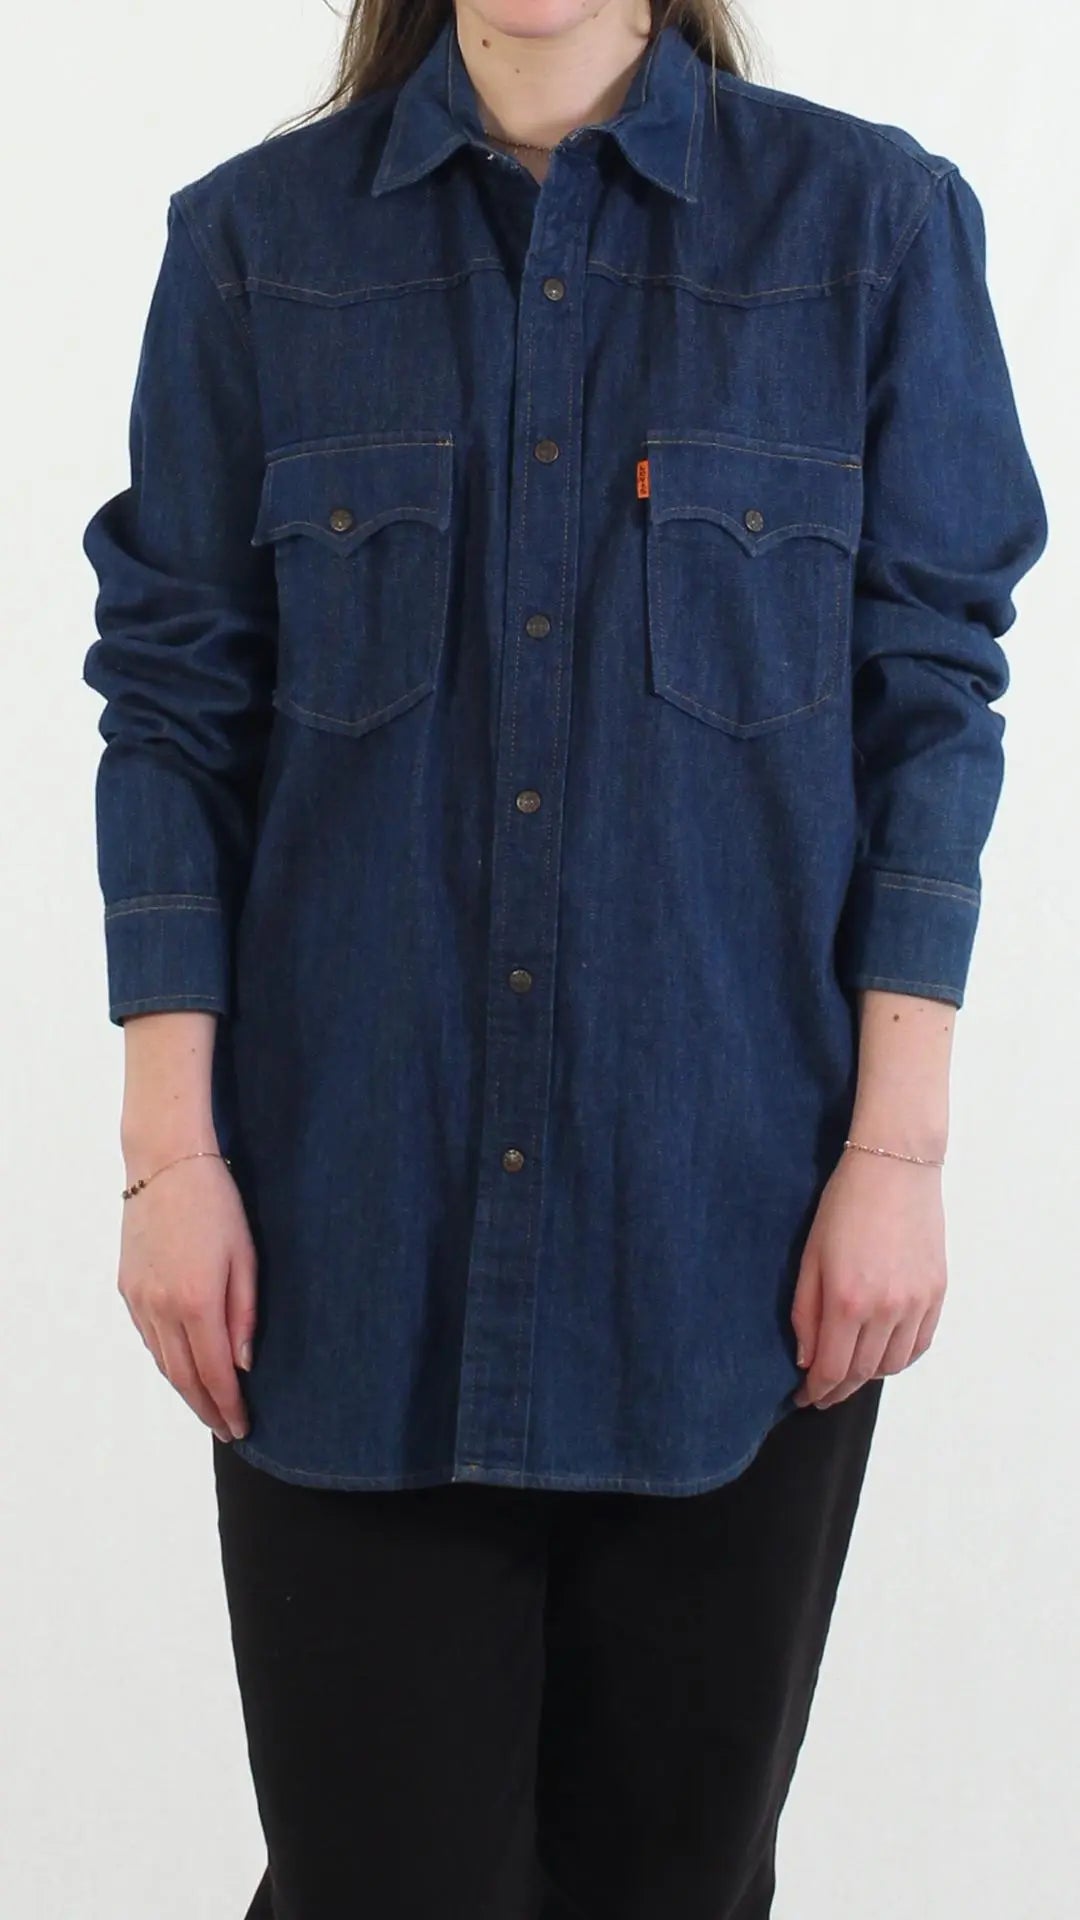 Levi's - Orange Tab Denim Shirt by Levi's- ThriftTale.com - Vintage and second handclothing